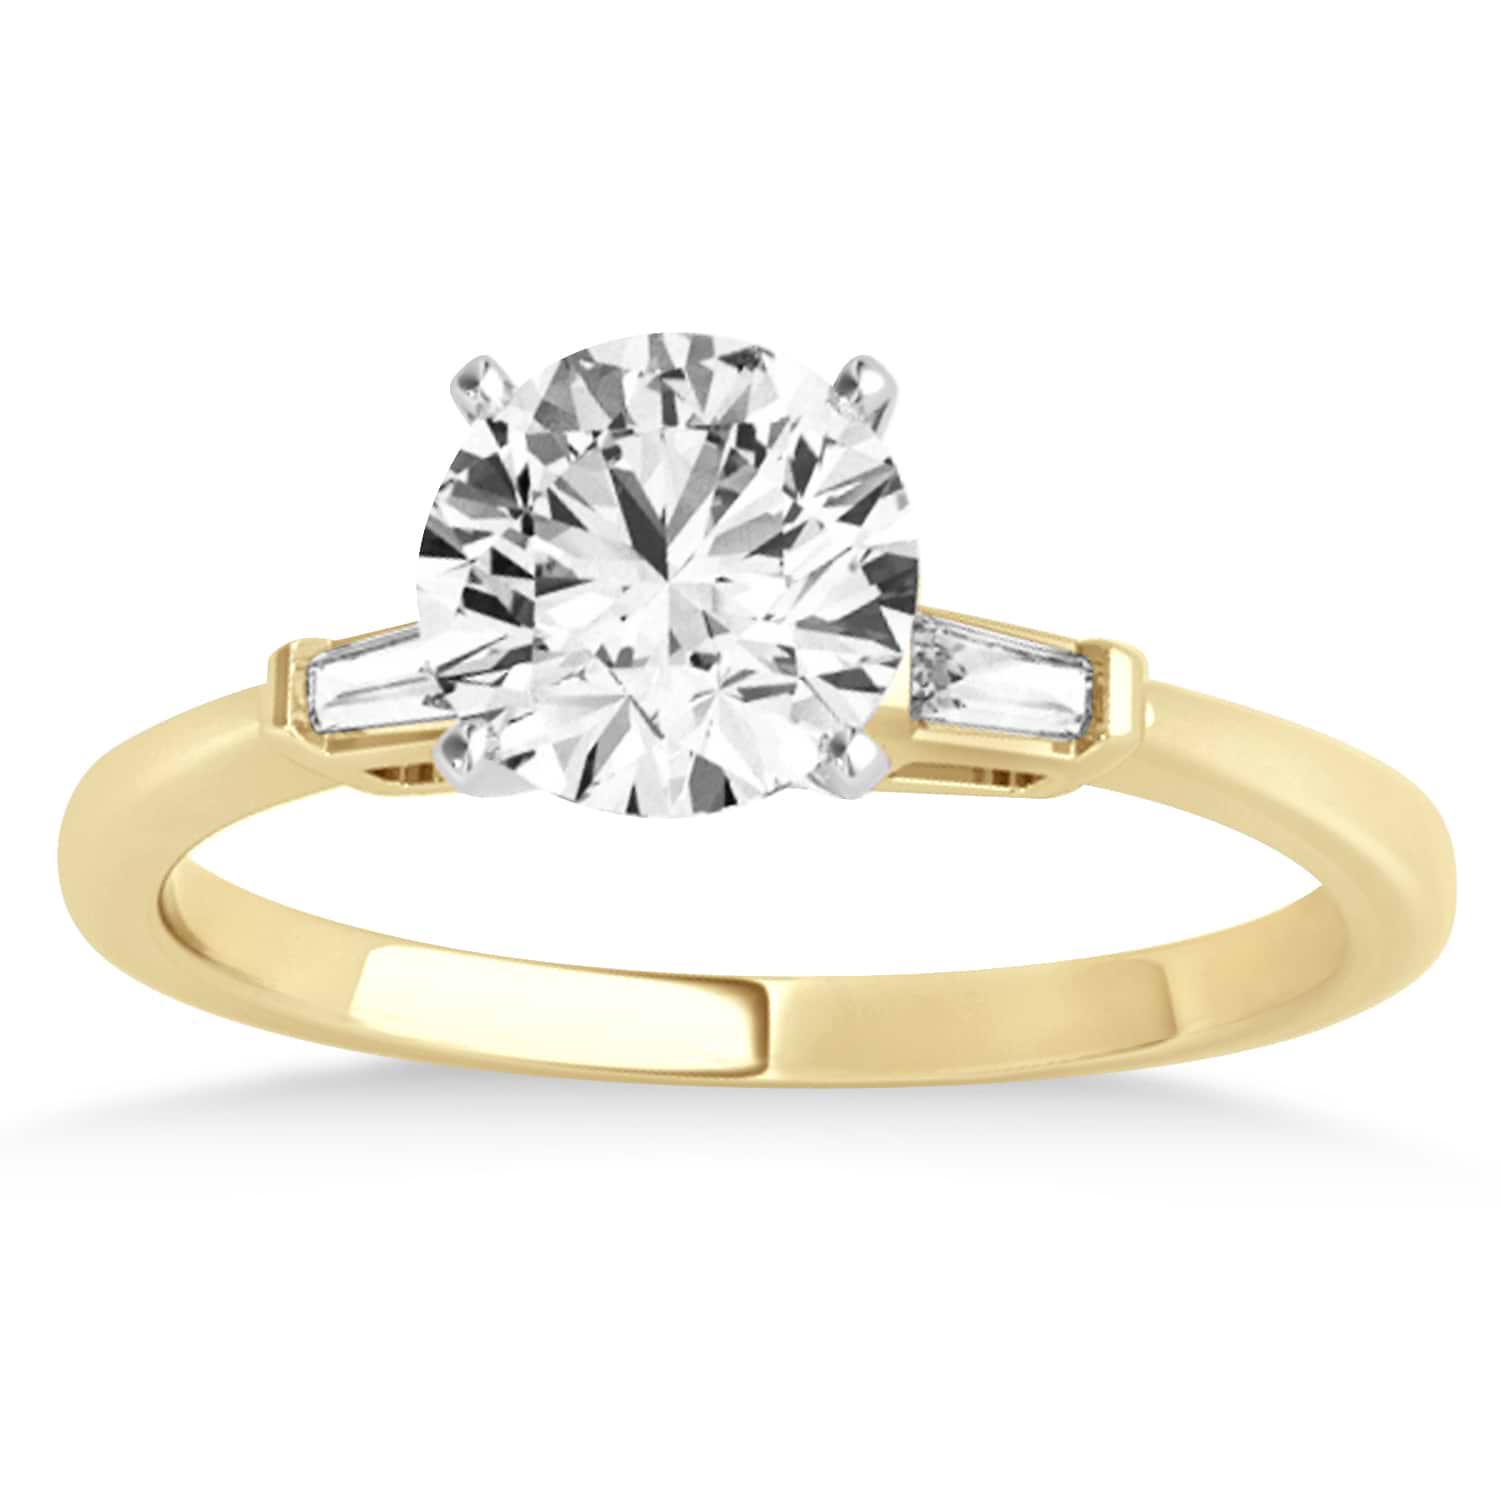 Tapered Baguette 3-Stone Diamond Engagement Ring 18k Yellow Gold (0.10ct)